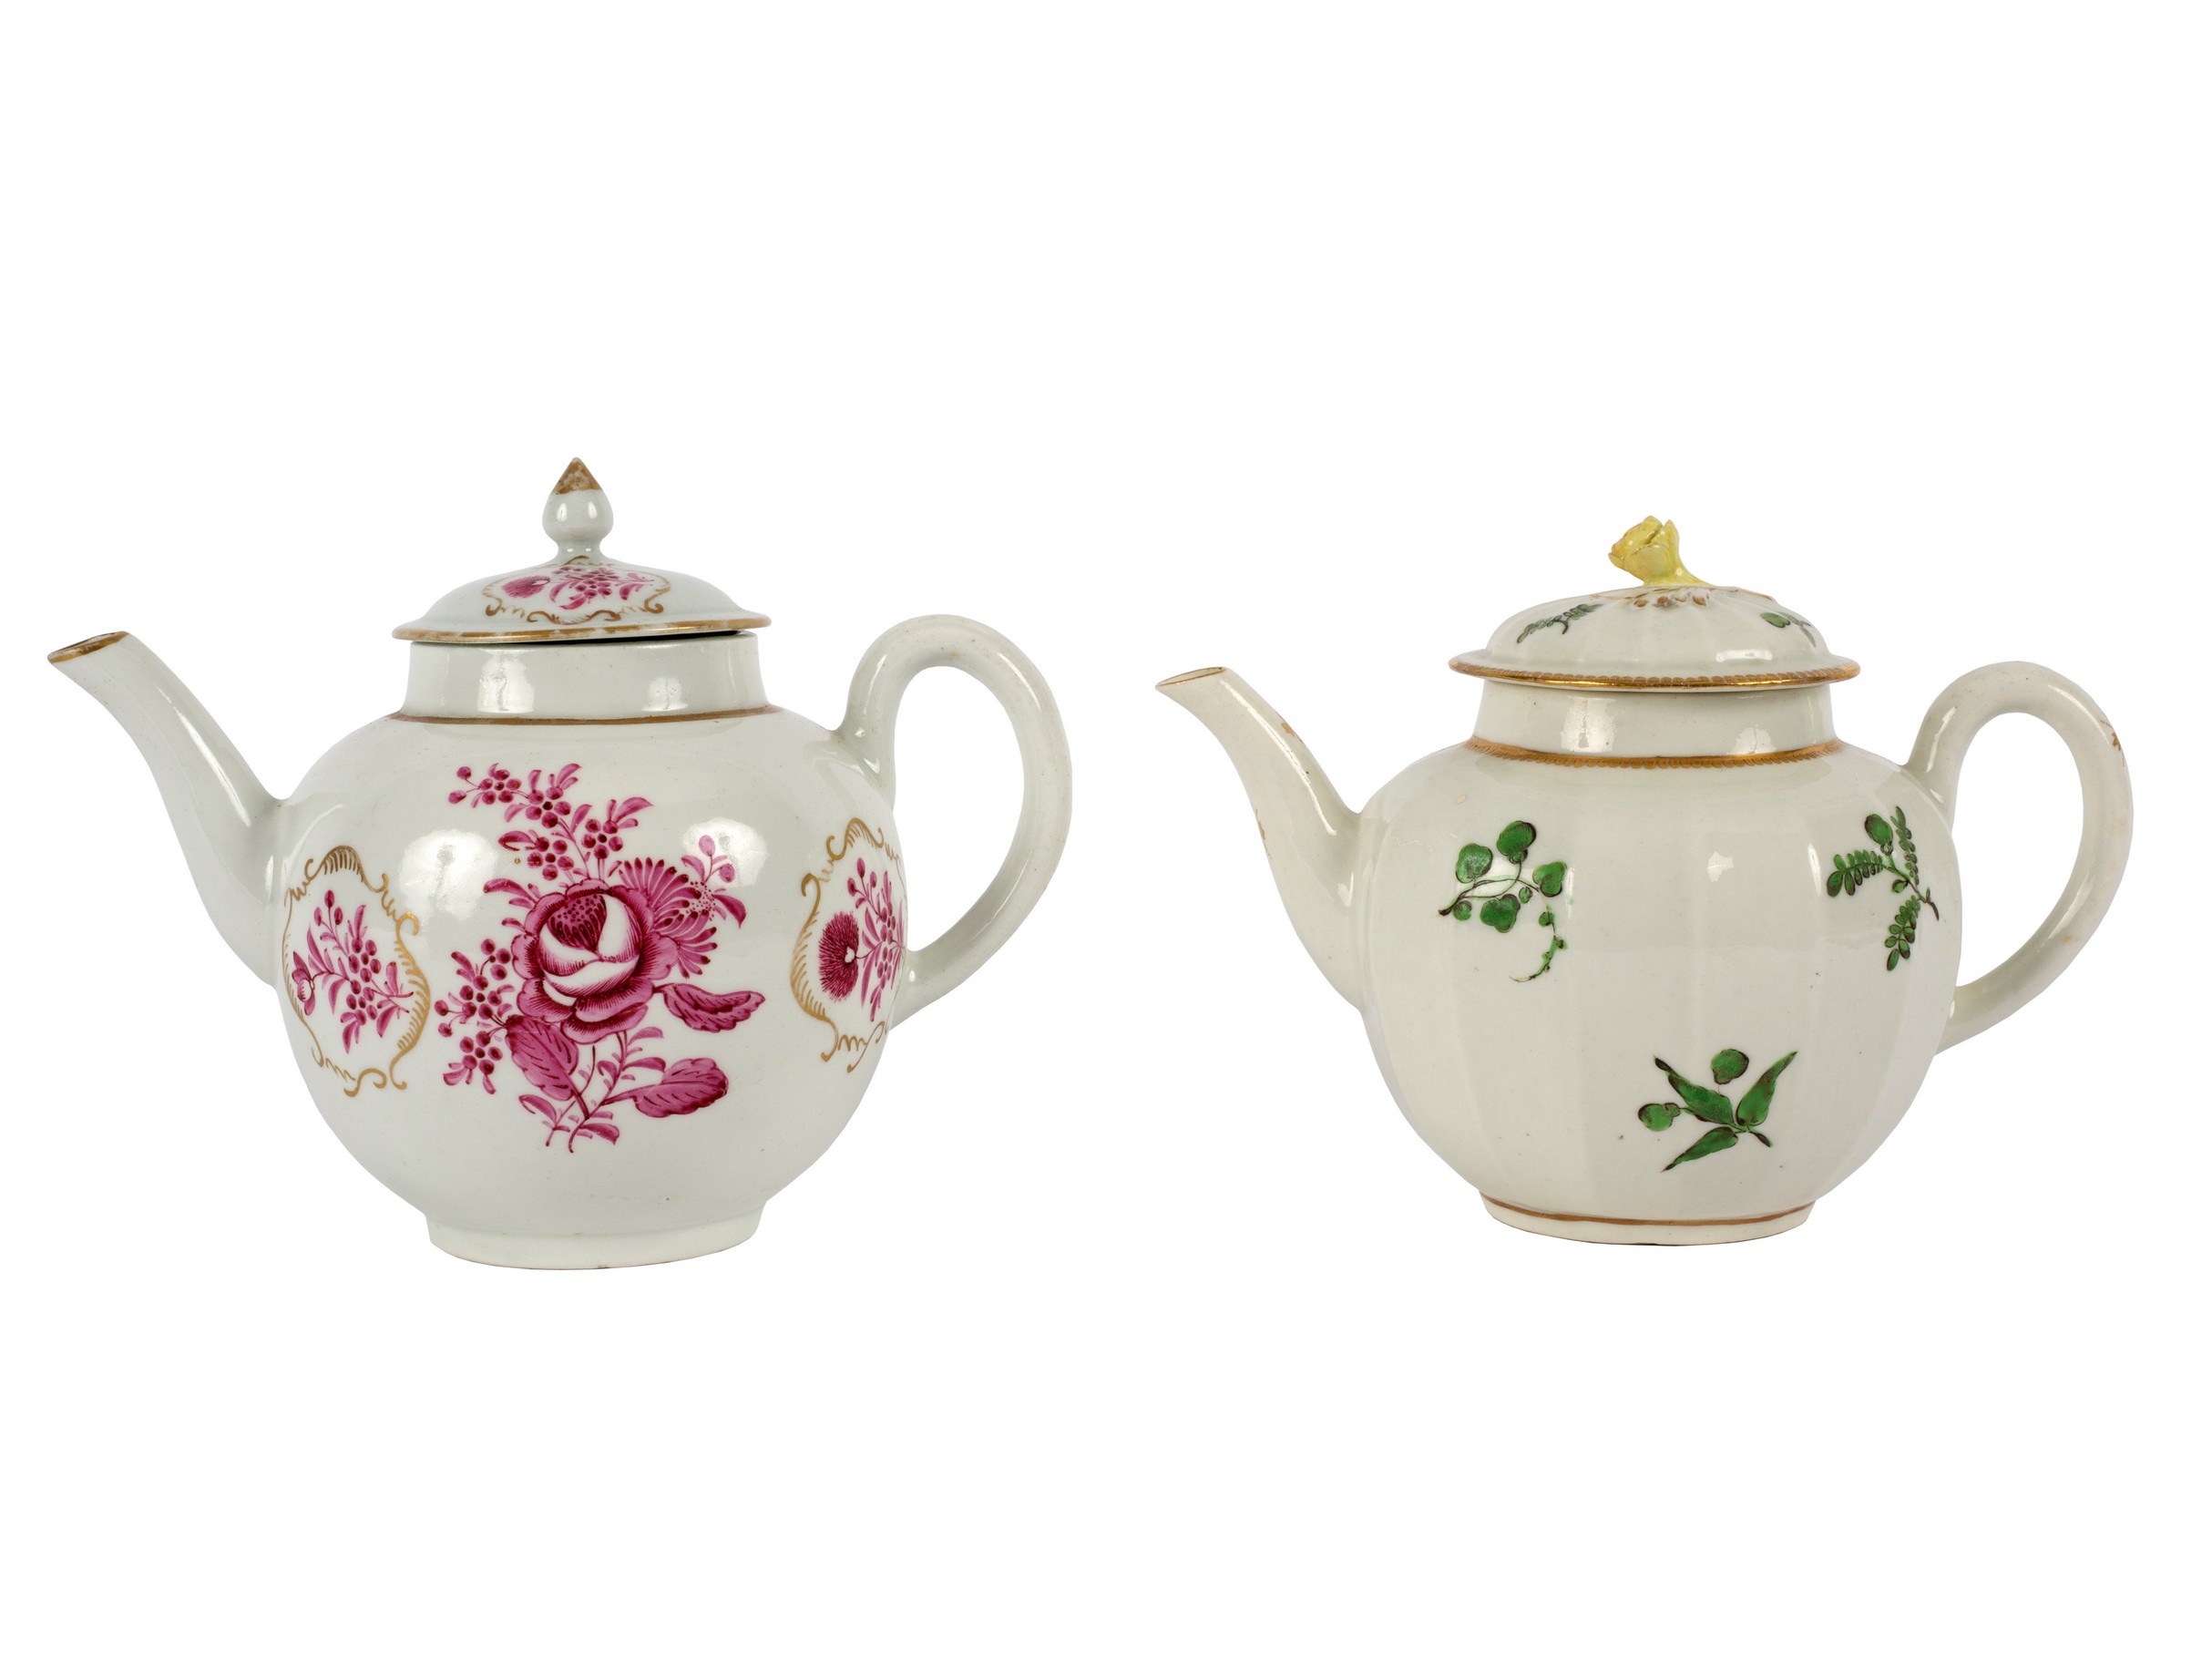 Two Worcester porcelain teapots and covers, circa 1770,